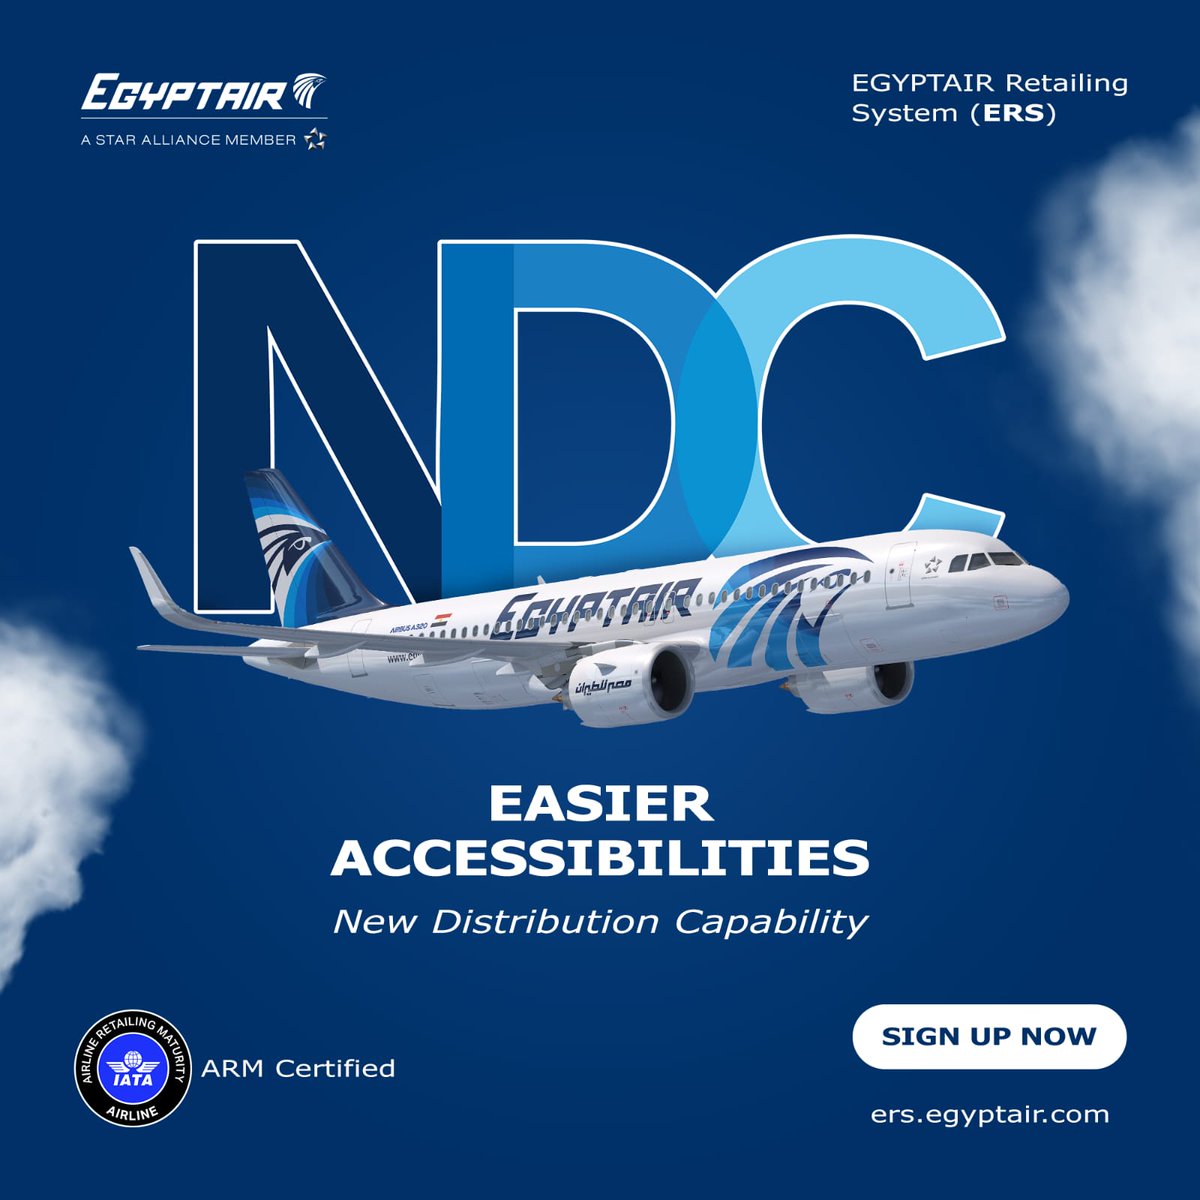 Experience the future of travel with NDC! Access exclusive offers, seamless bookings, and user-friendly options with EGYPTAIR. Elevate your journey today and sign up at: ers.egyptair.com and reach out to us at: ndcsupport@egyptair.com for additional help.